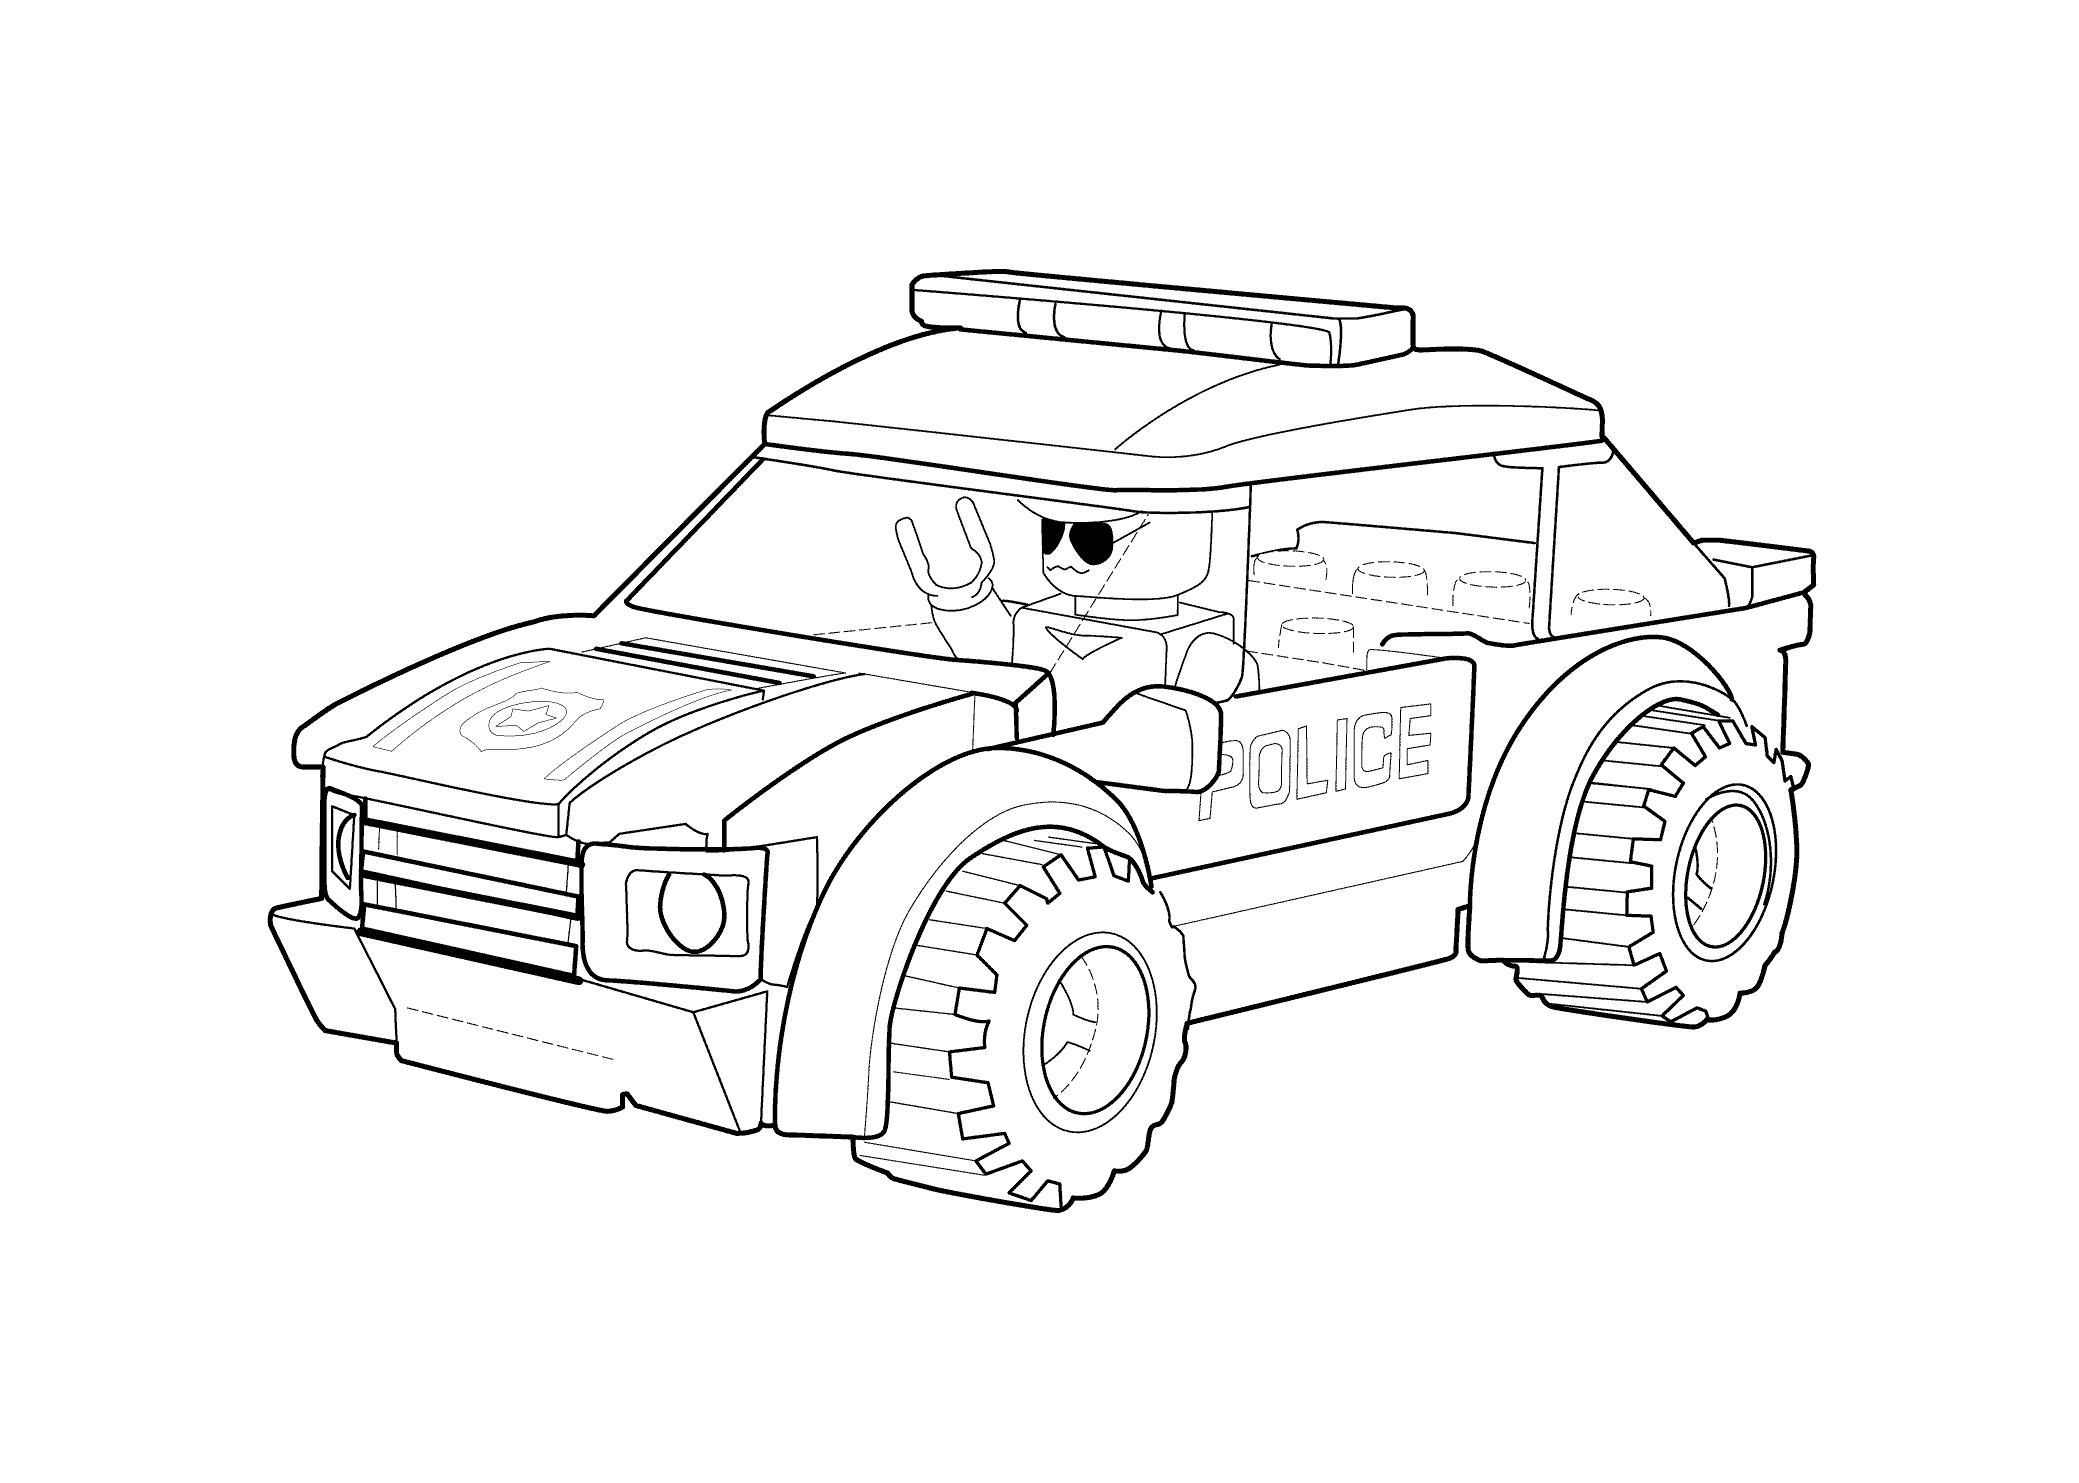 lego city coloring page lego coloring pages best coloring pages for kids page city lego coloring 